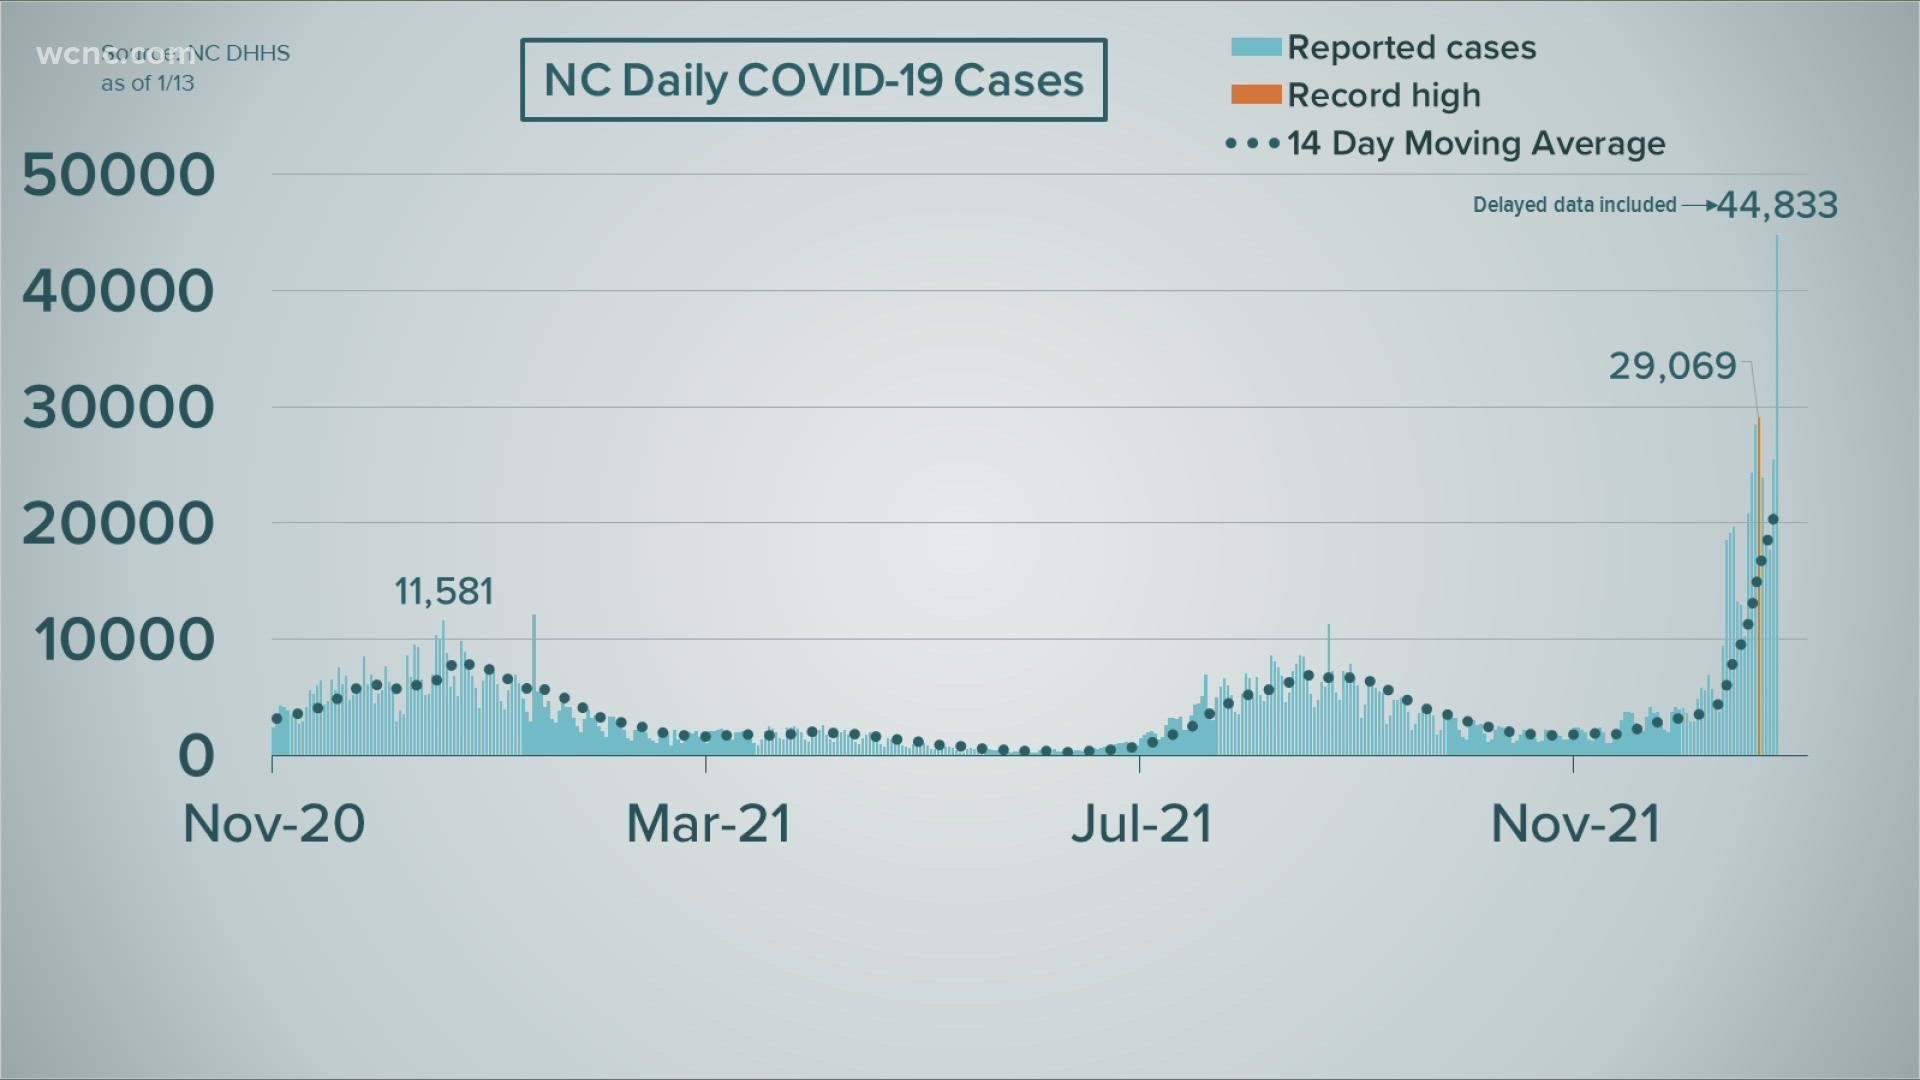 State health officials reported over 44,000 new infections Thursday, setting a new single-day record for COVID-19 cases.